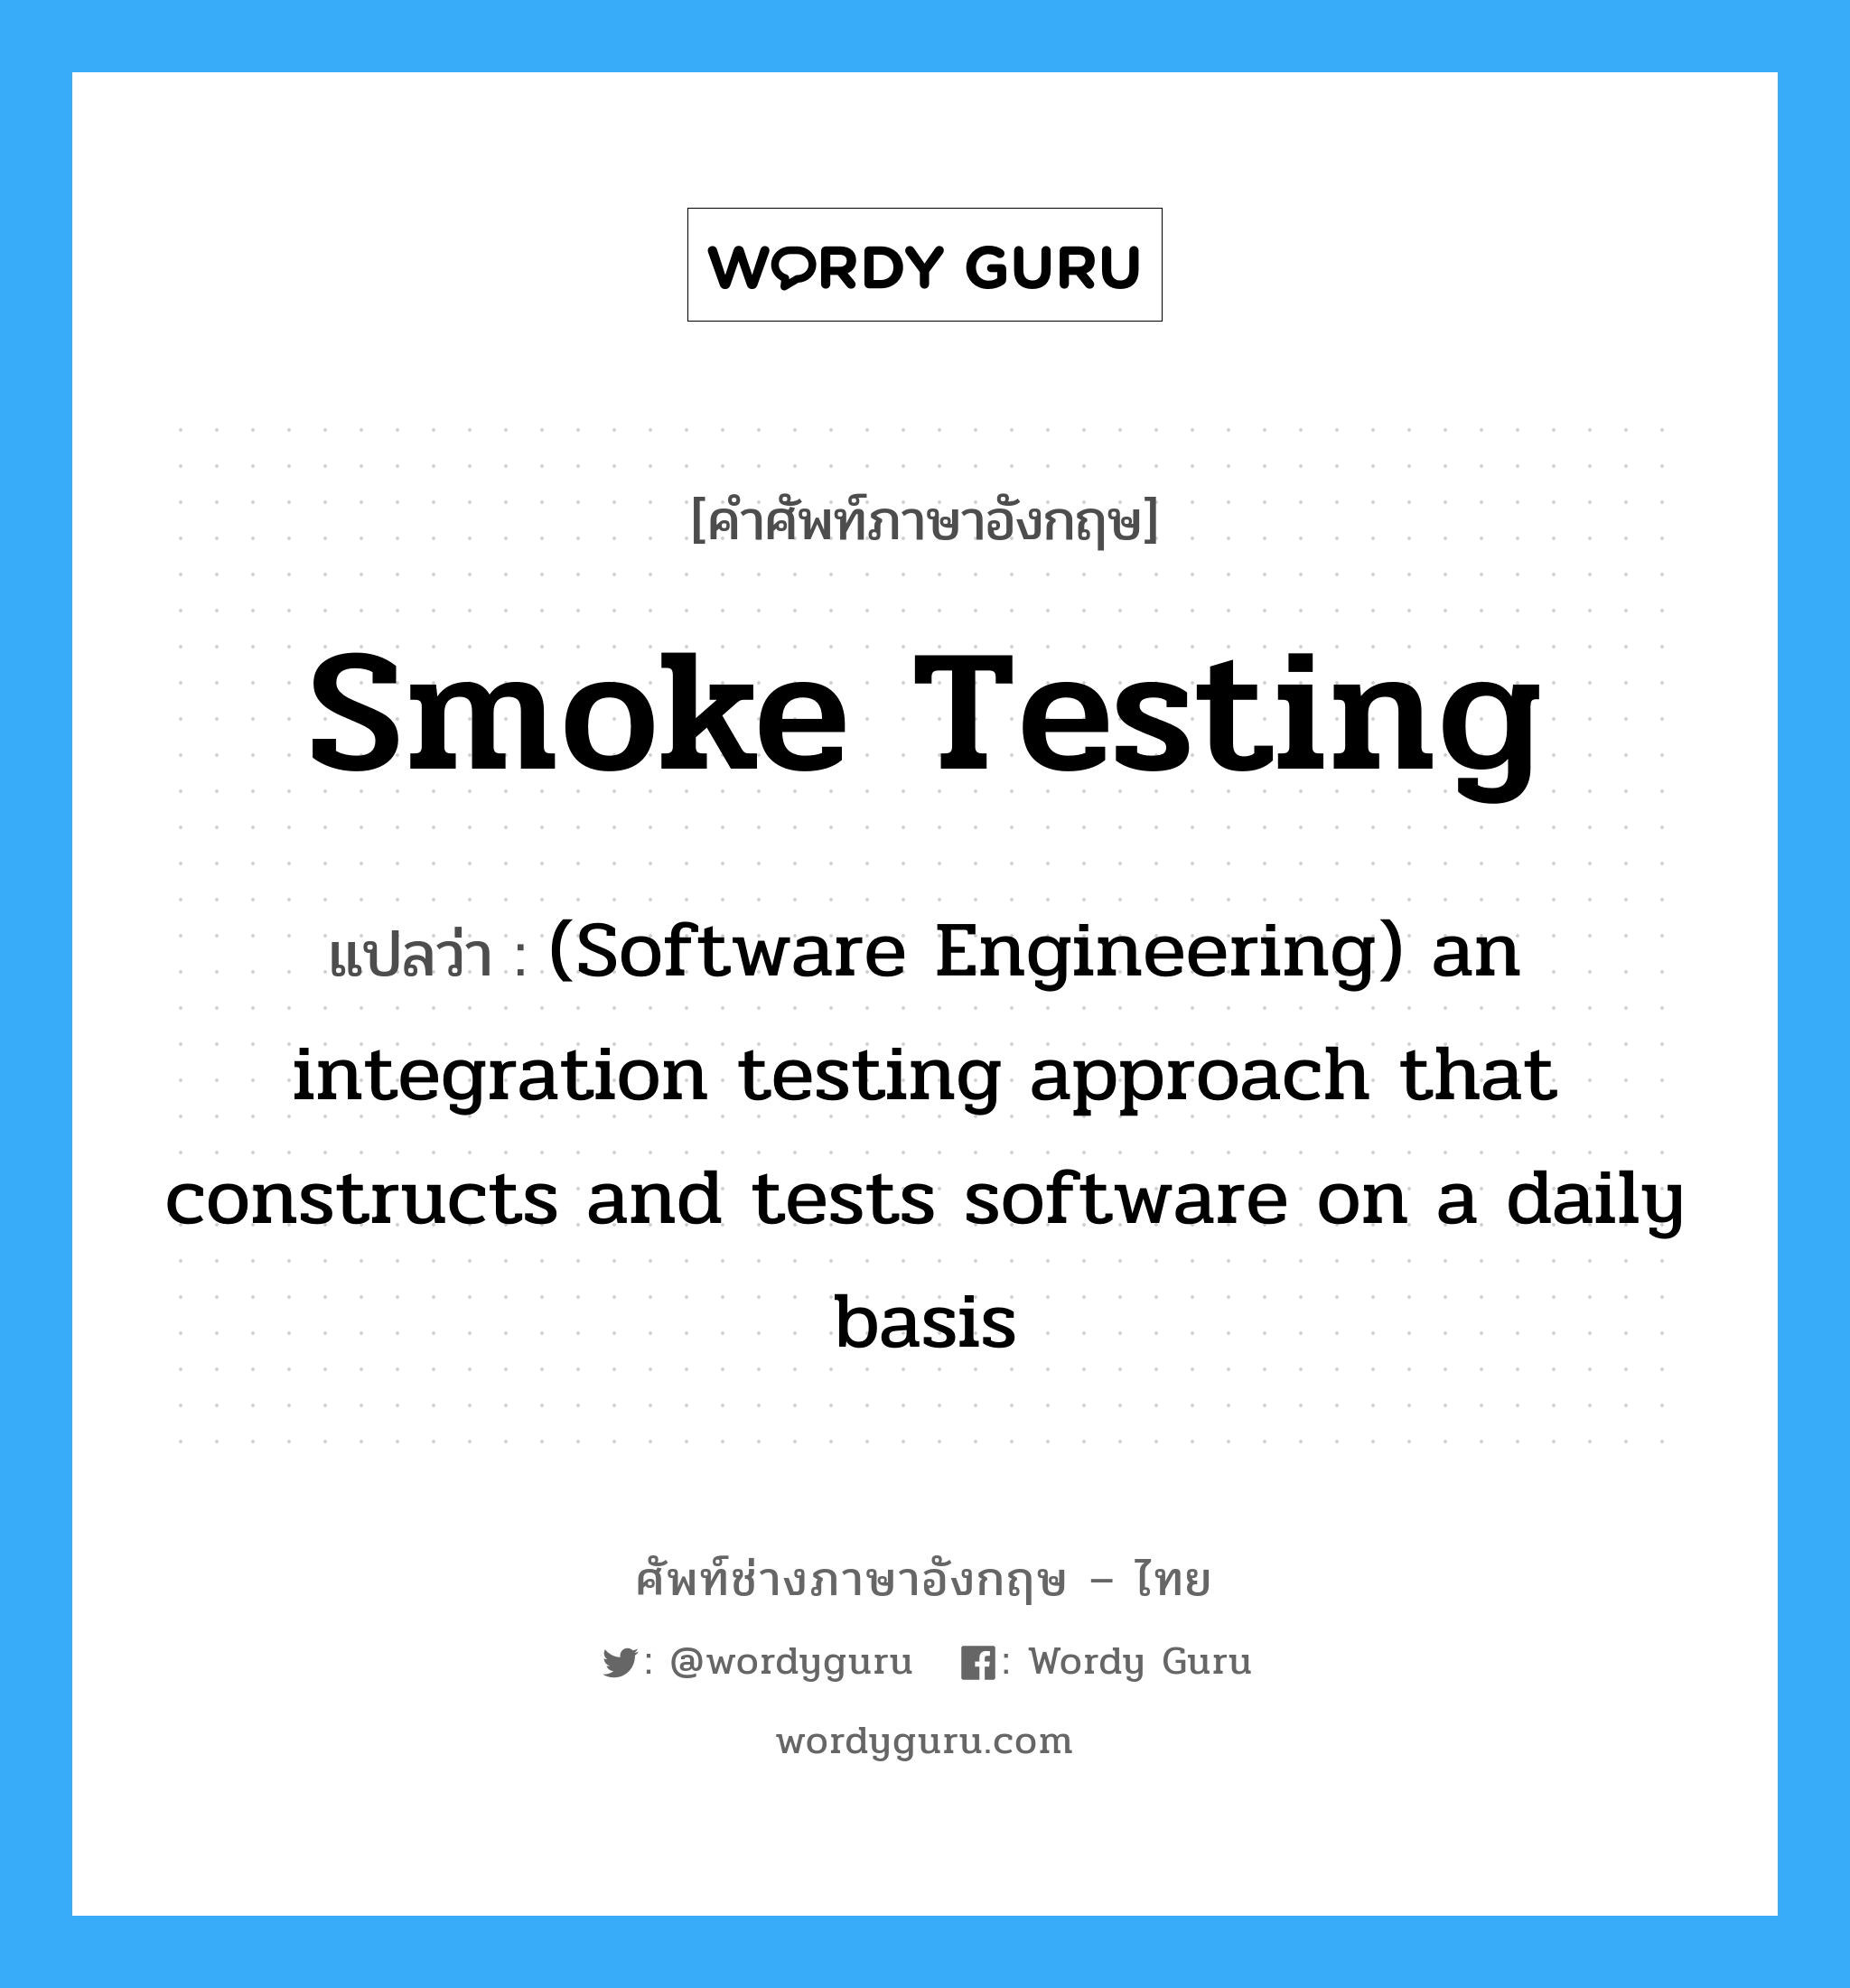 Smoke testing แปลว่า?, คำศัพท์ช่างภาษาอังกฤษ - ไทย Smoke testing คำศัพท์ภาษาอังกฤษ Smoke testing แปลว่า (Software Engineering) an integration testing approach that constructs and tests software on a daily basis